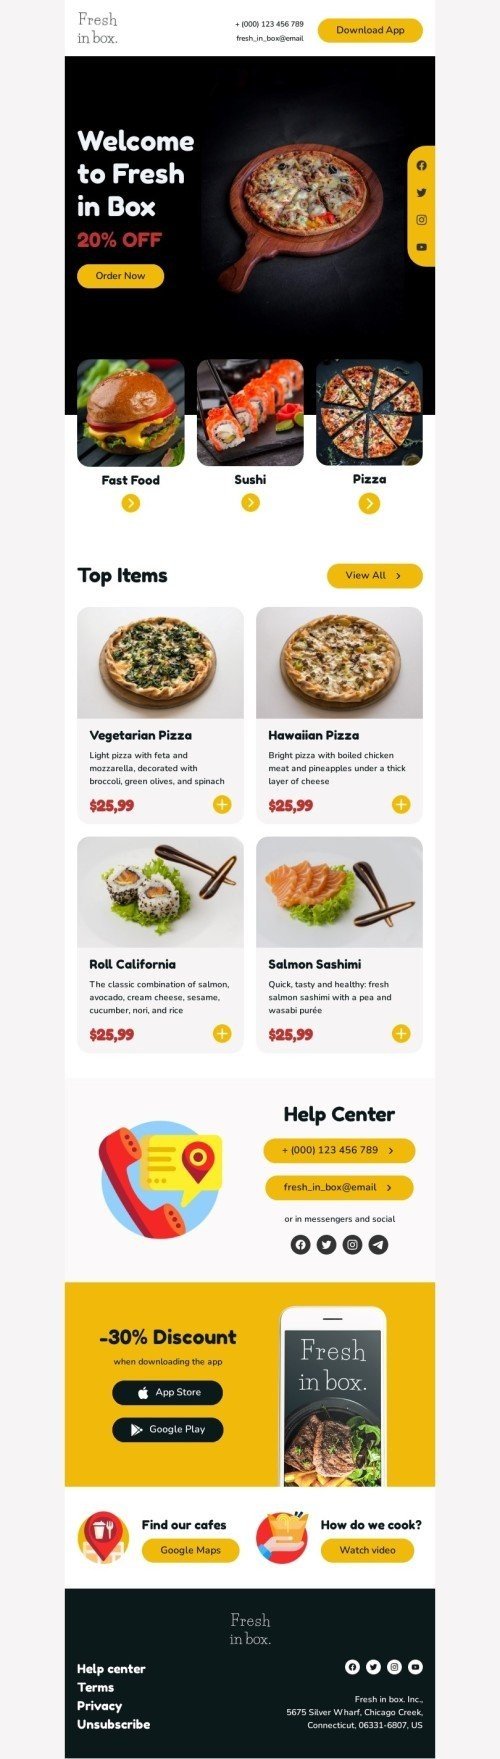 Promo email template "Promotion of food" for food industry desktop view